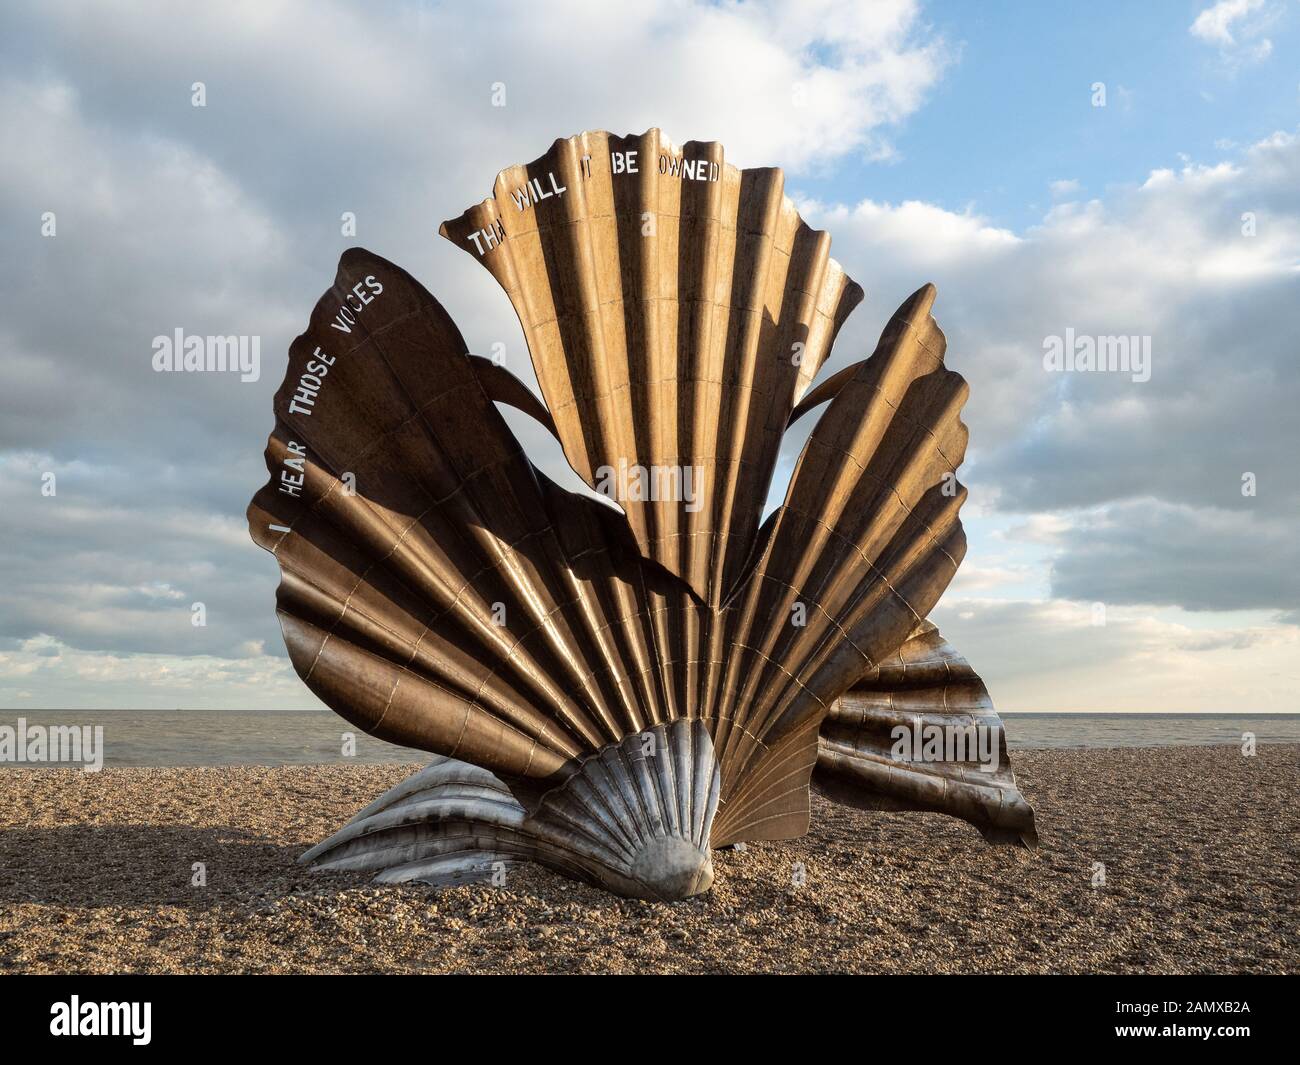 A view of the shell sculpture on Aldeburgh beach in bright sunlight with clouds in the sky. Stock Photo